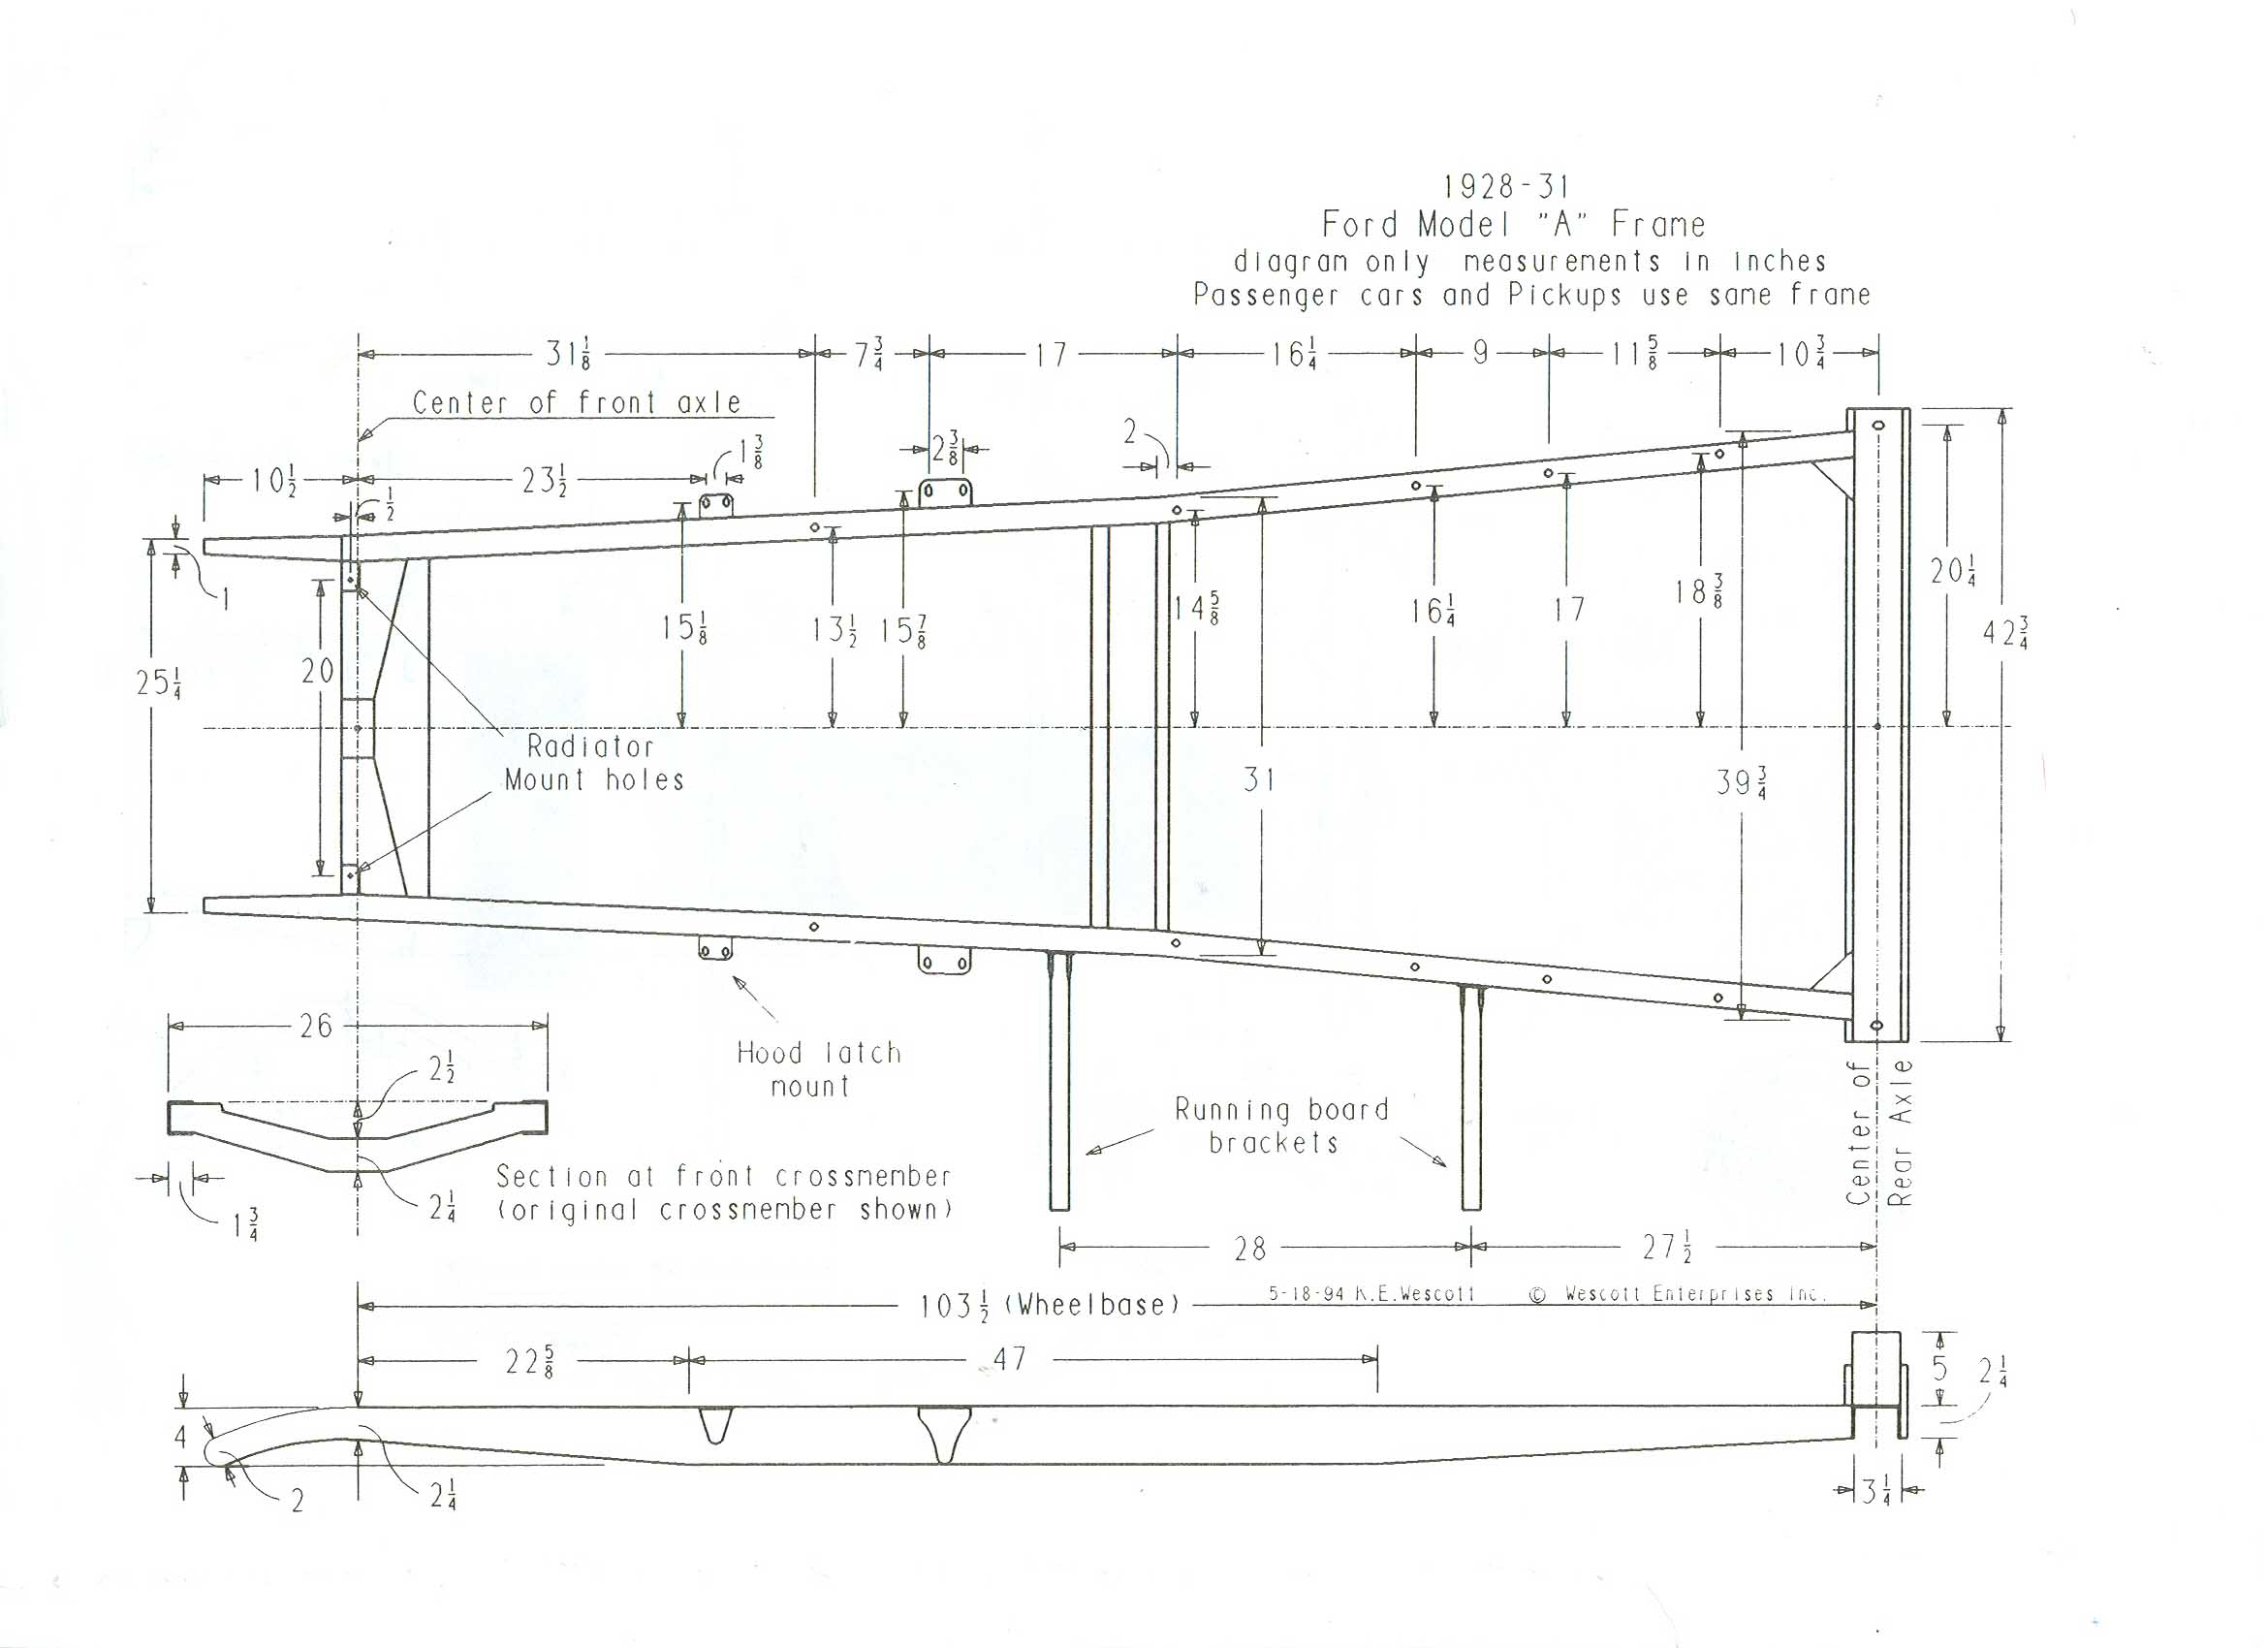 Model A Ford Frame Dimensions